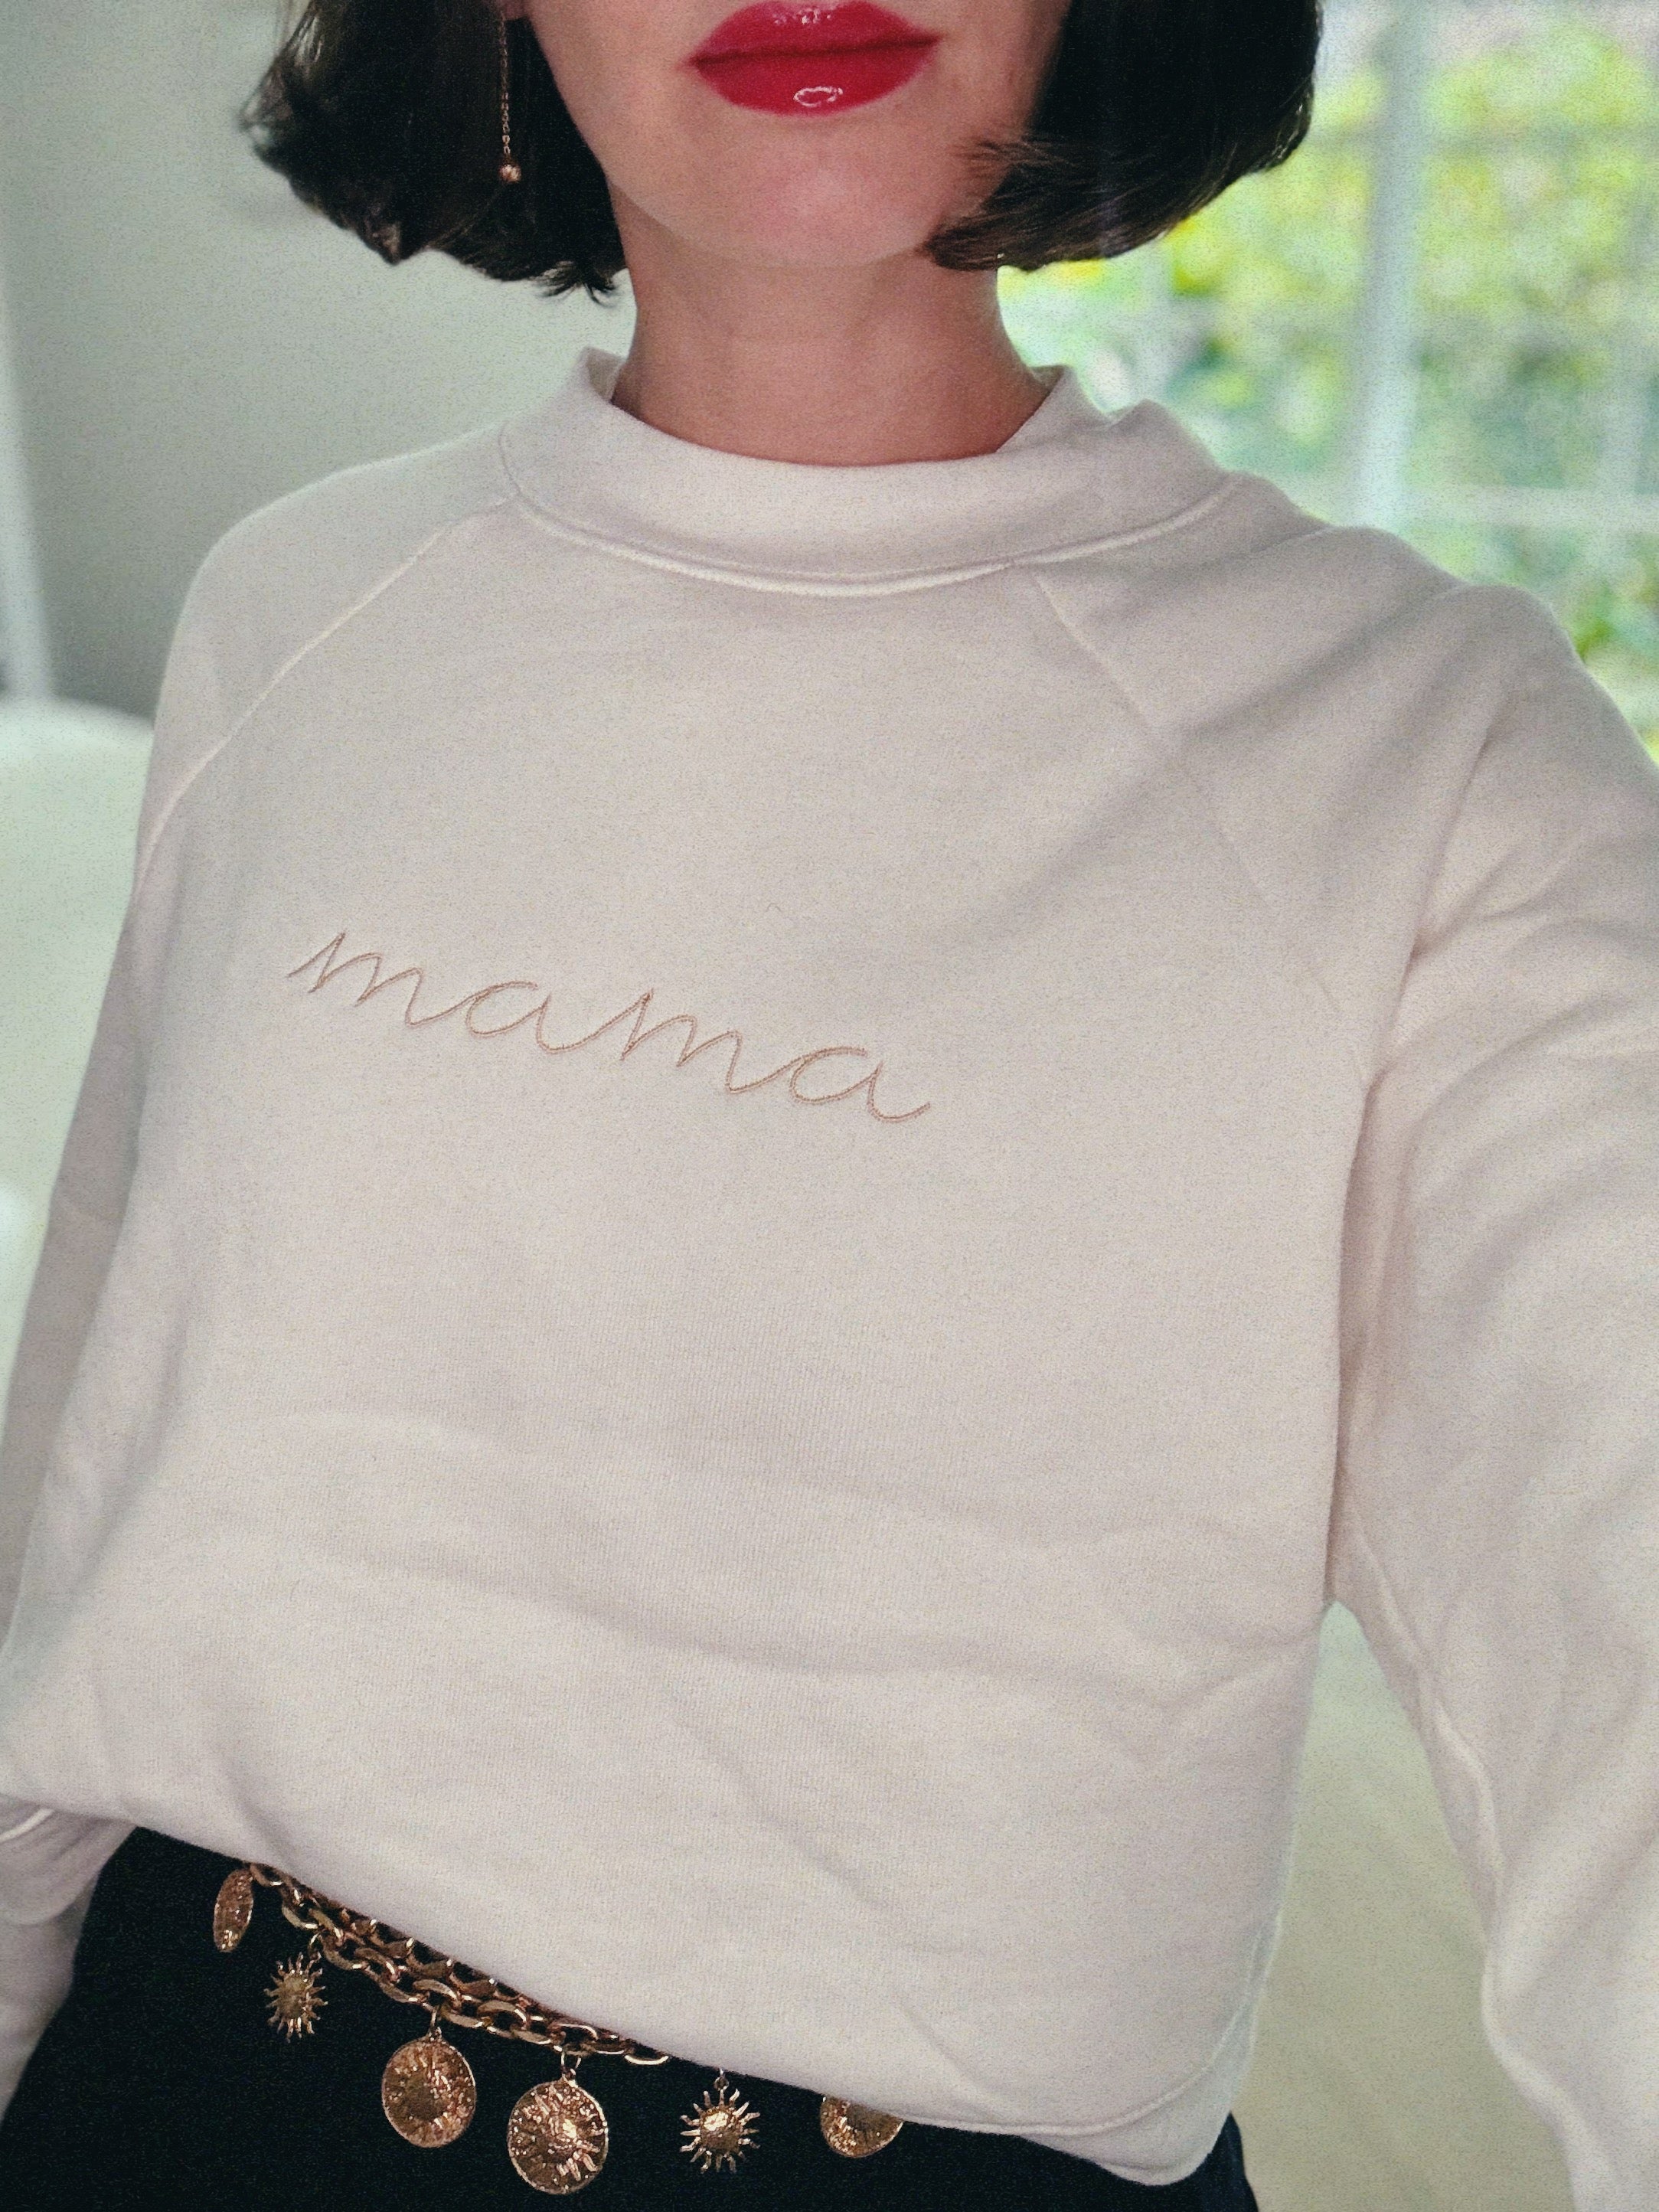 Mama sweater perfect gift for mom on Mother’s Day. Cool gifts for millennial mom 